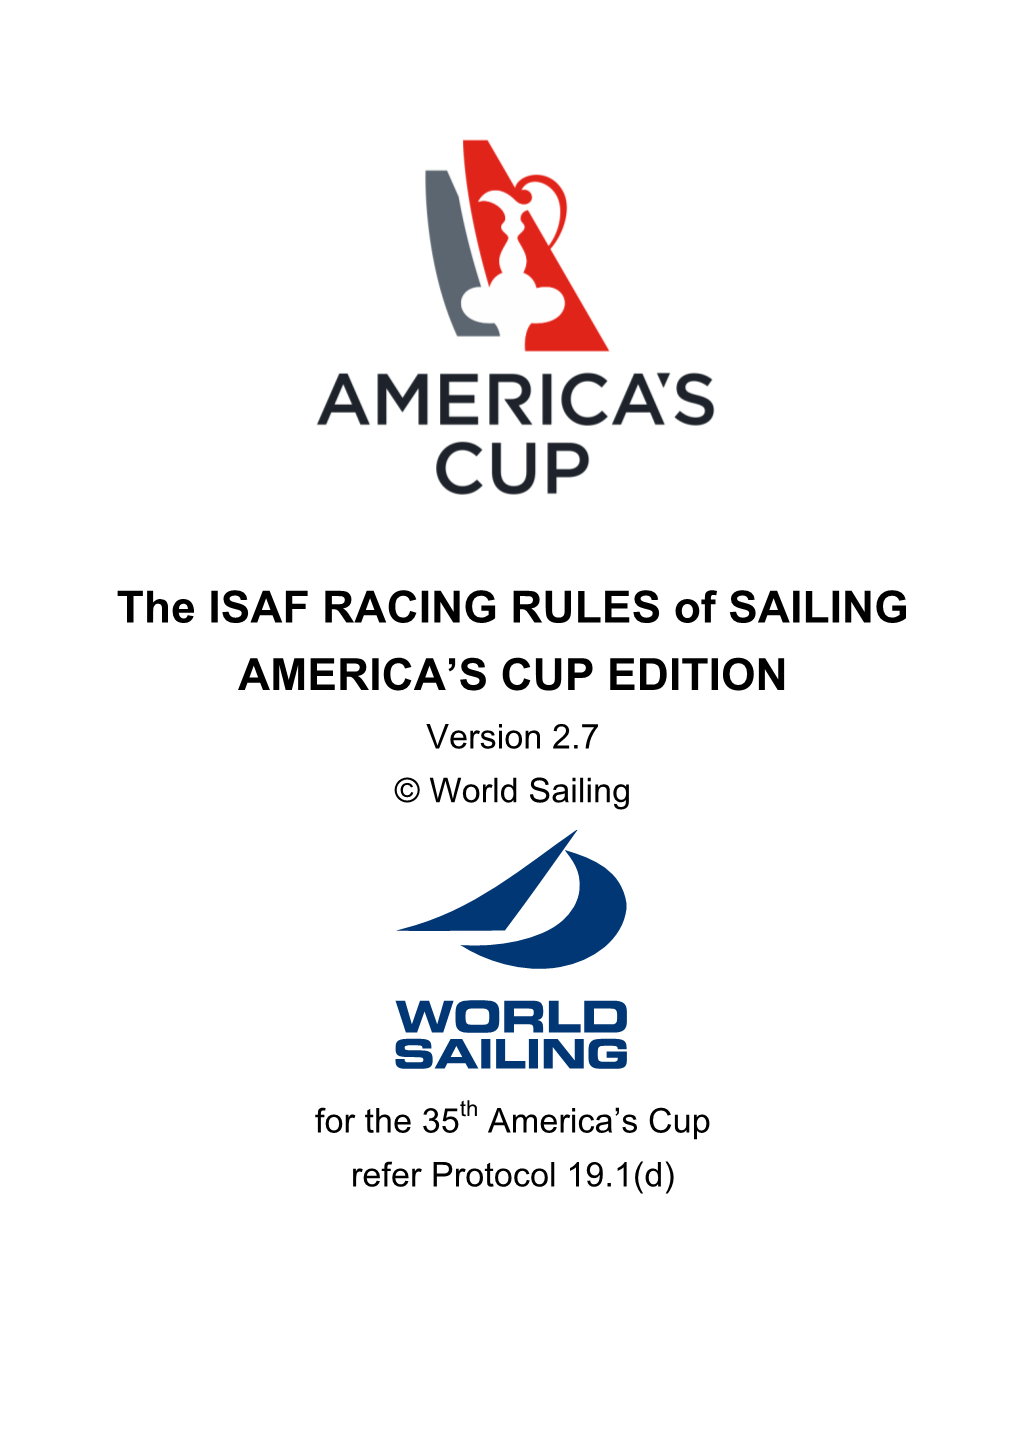 The ISAF RACING RULES of SAILING AMERICA's CUP EDITION